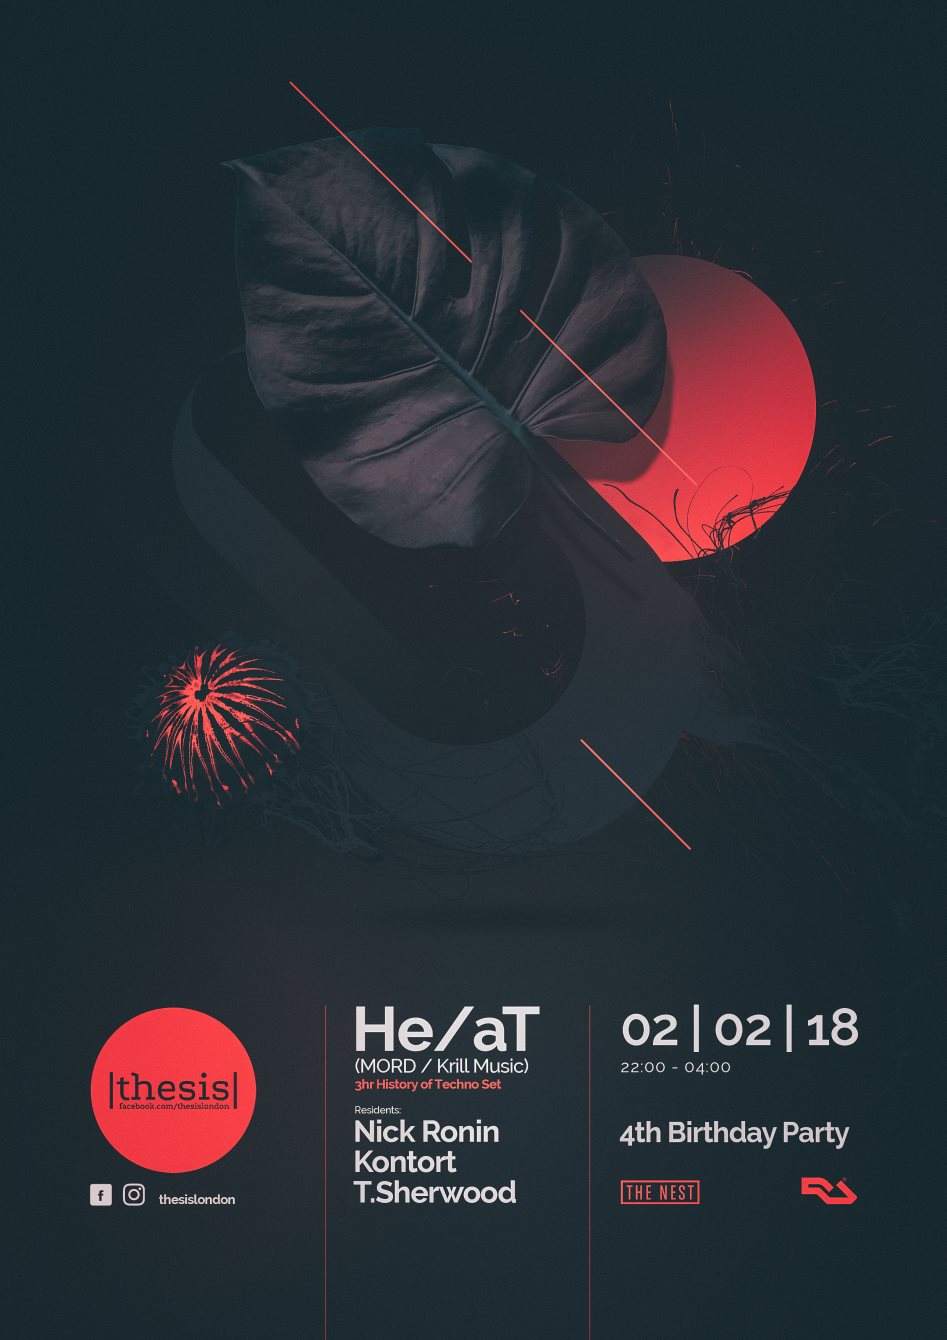 thesis 4th Birthday: He/aT 3hr History Of Techno Set - フライヤー表